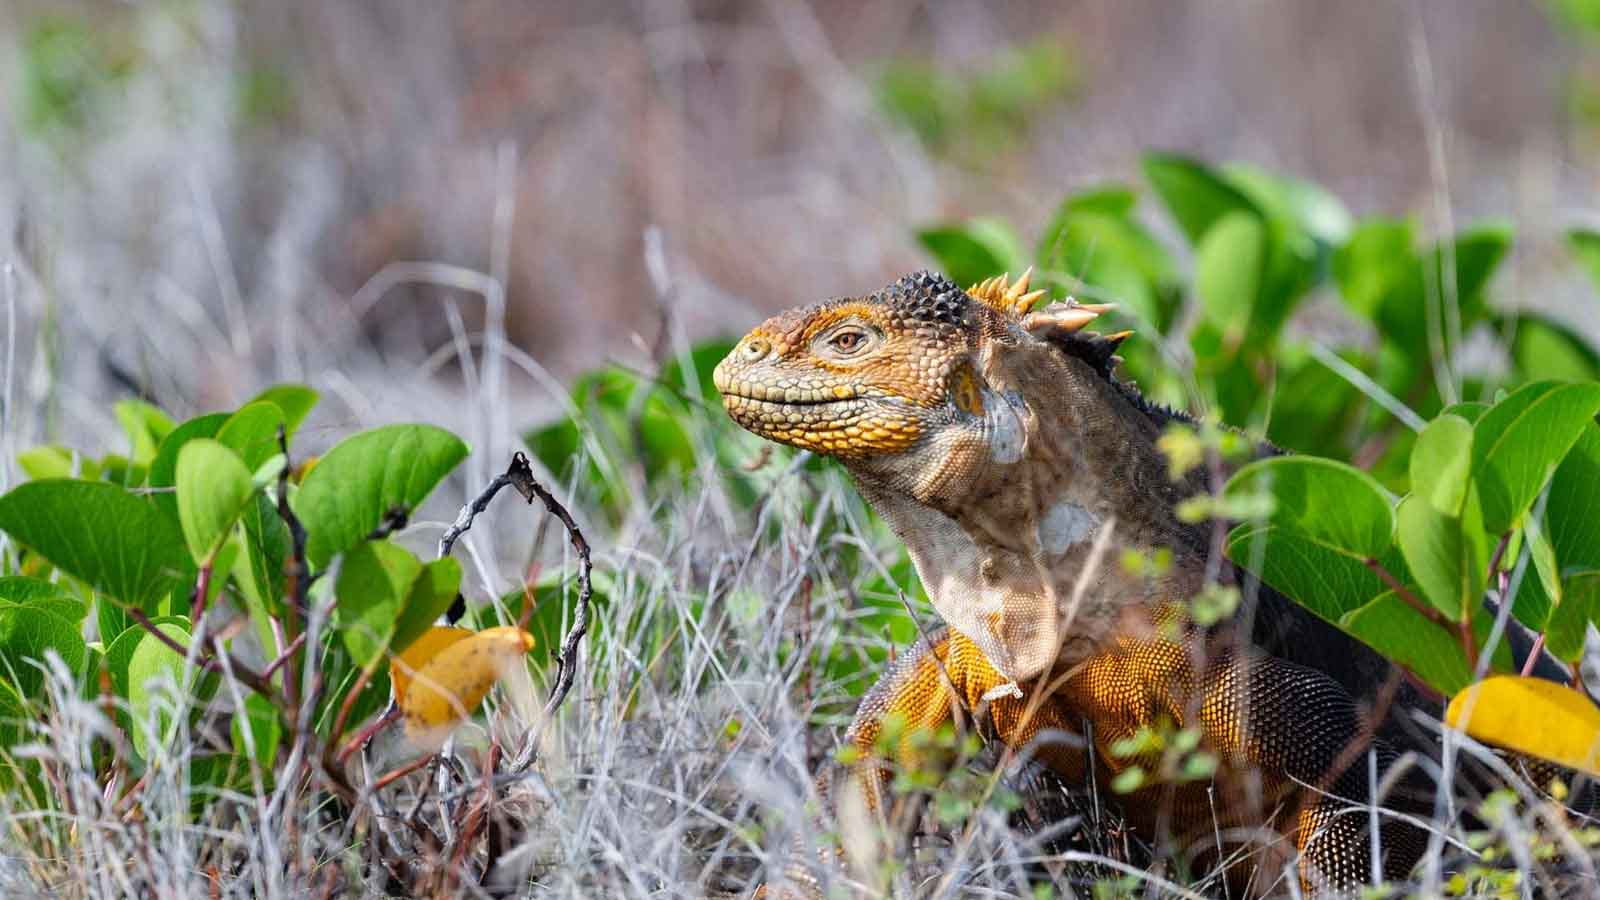 Galapagos Islands: Iguanas are being reintroduced after almost 200 years of their extinction